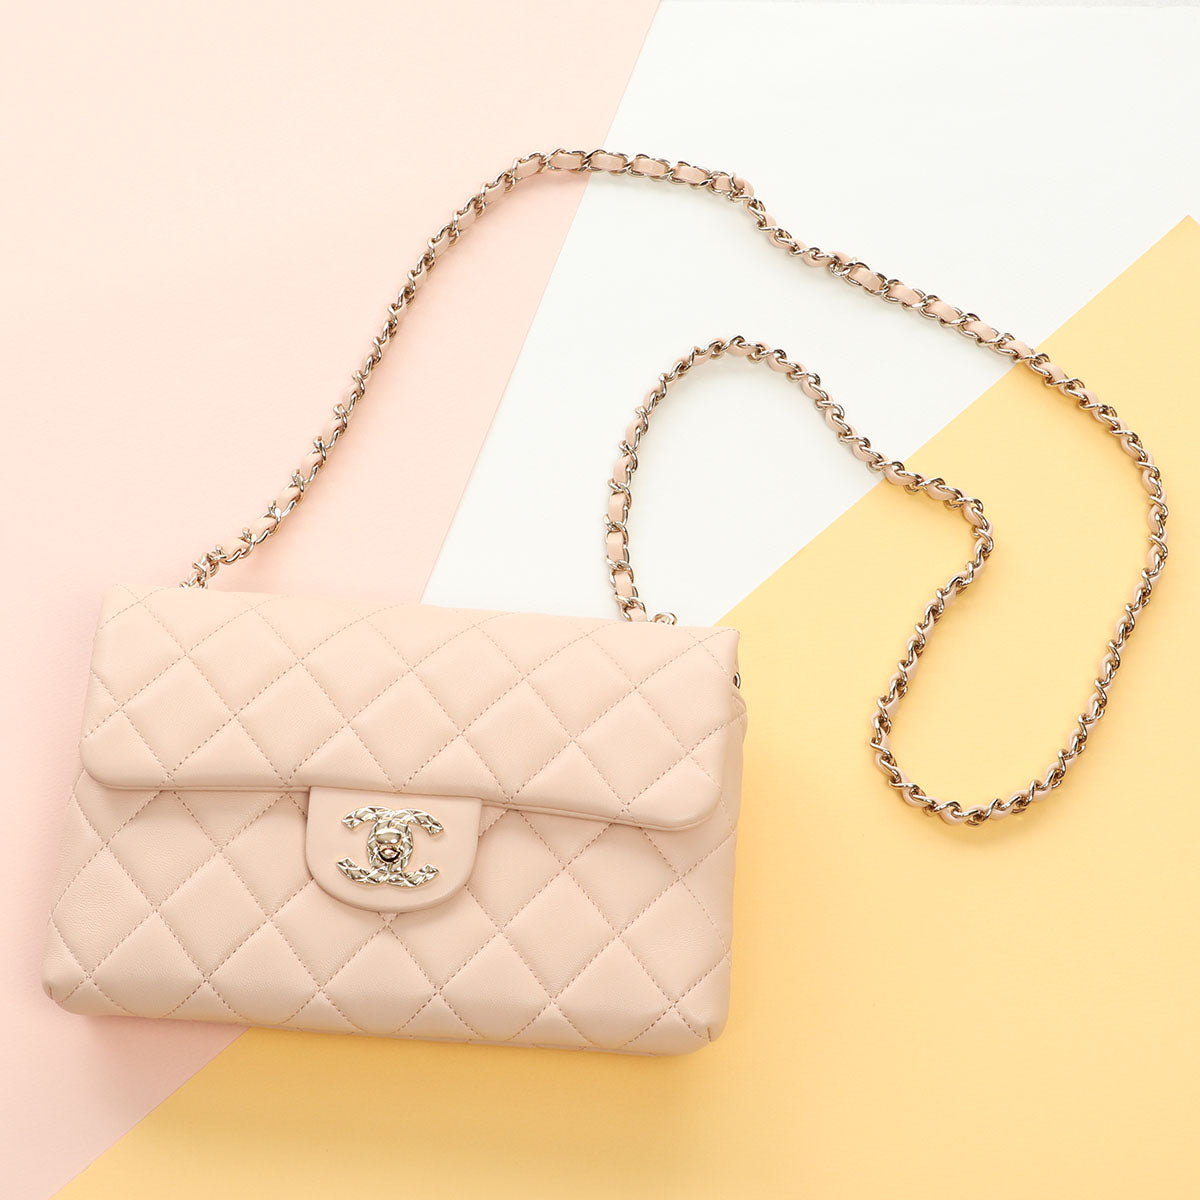 CHANEL Lambskin Quilted Mini Flap Bag Beige